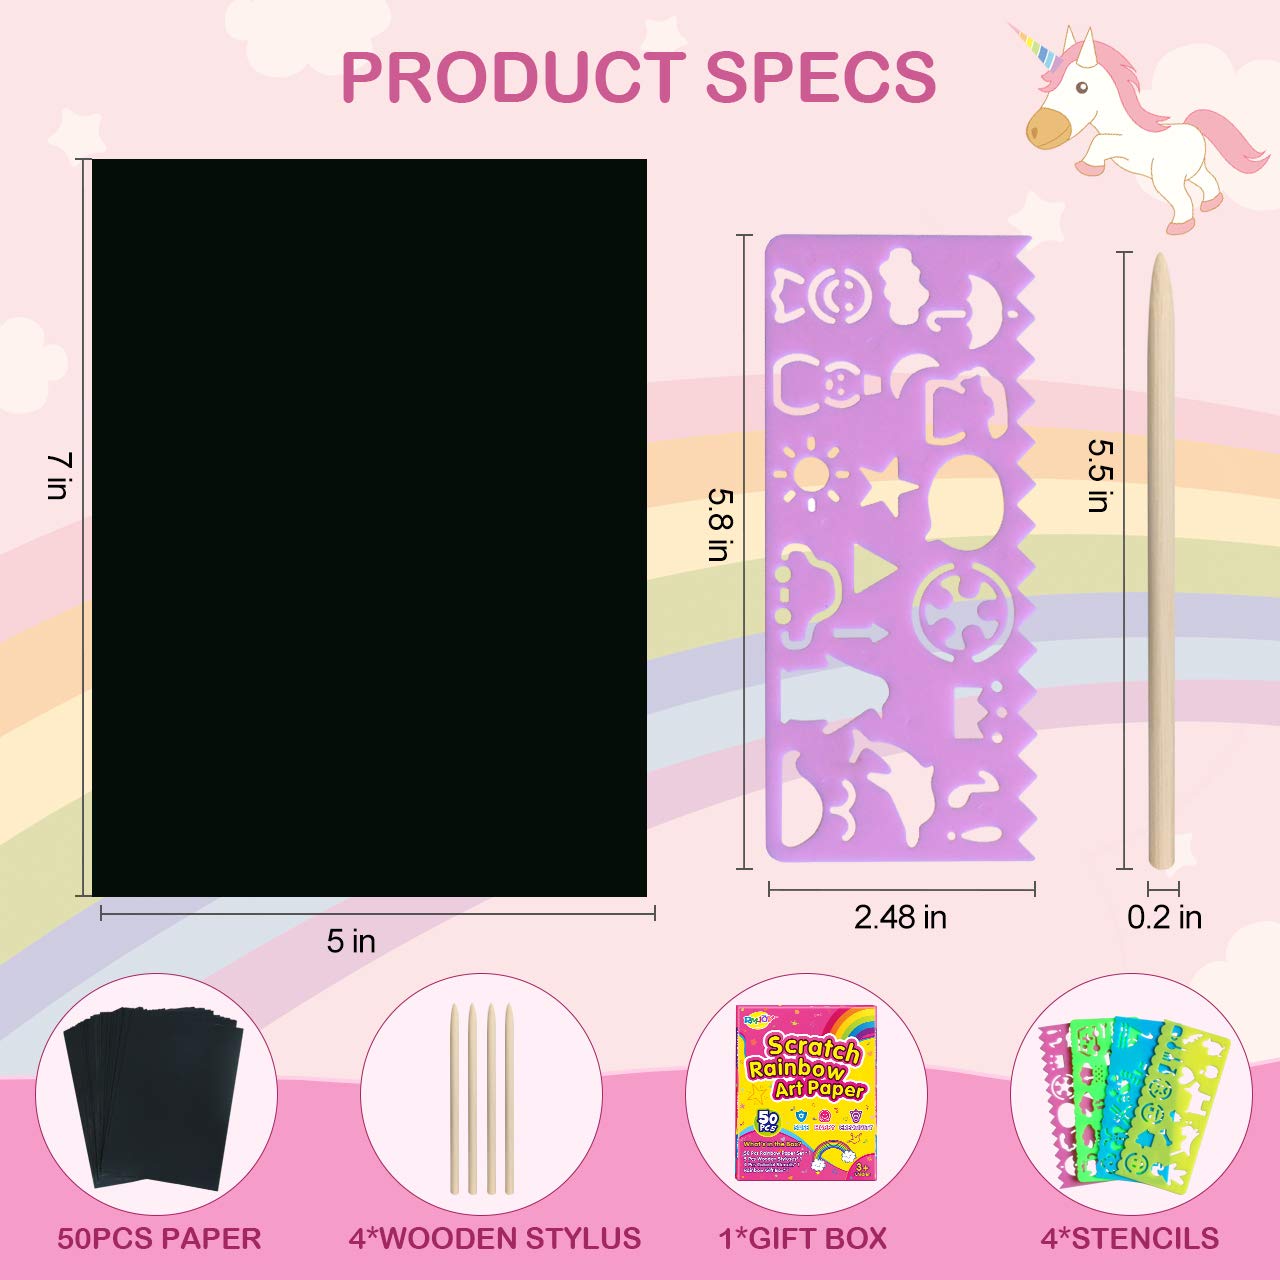 RMJOY Rainbow Scratch Paper Sets: 59pcs Magic Art Craft Scratch Off Papers Supplies Kits Pad for Age 3-12 Kids Girl Boy Teen Toy Game Gift for Birthday|Christmas|Halloween|DIY Activities|Painting